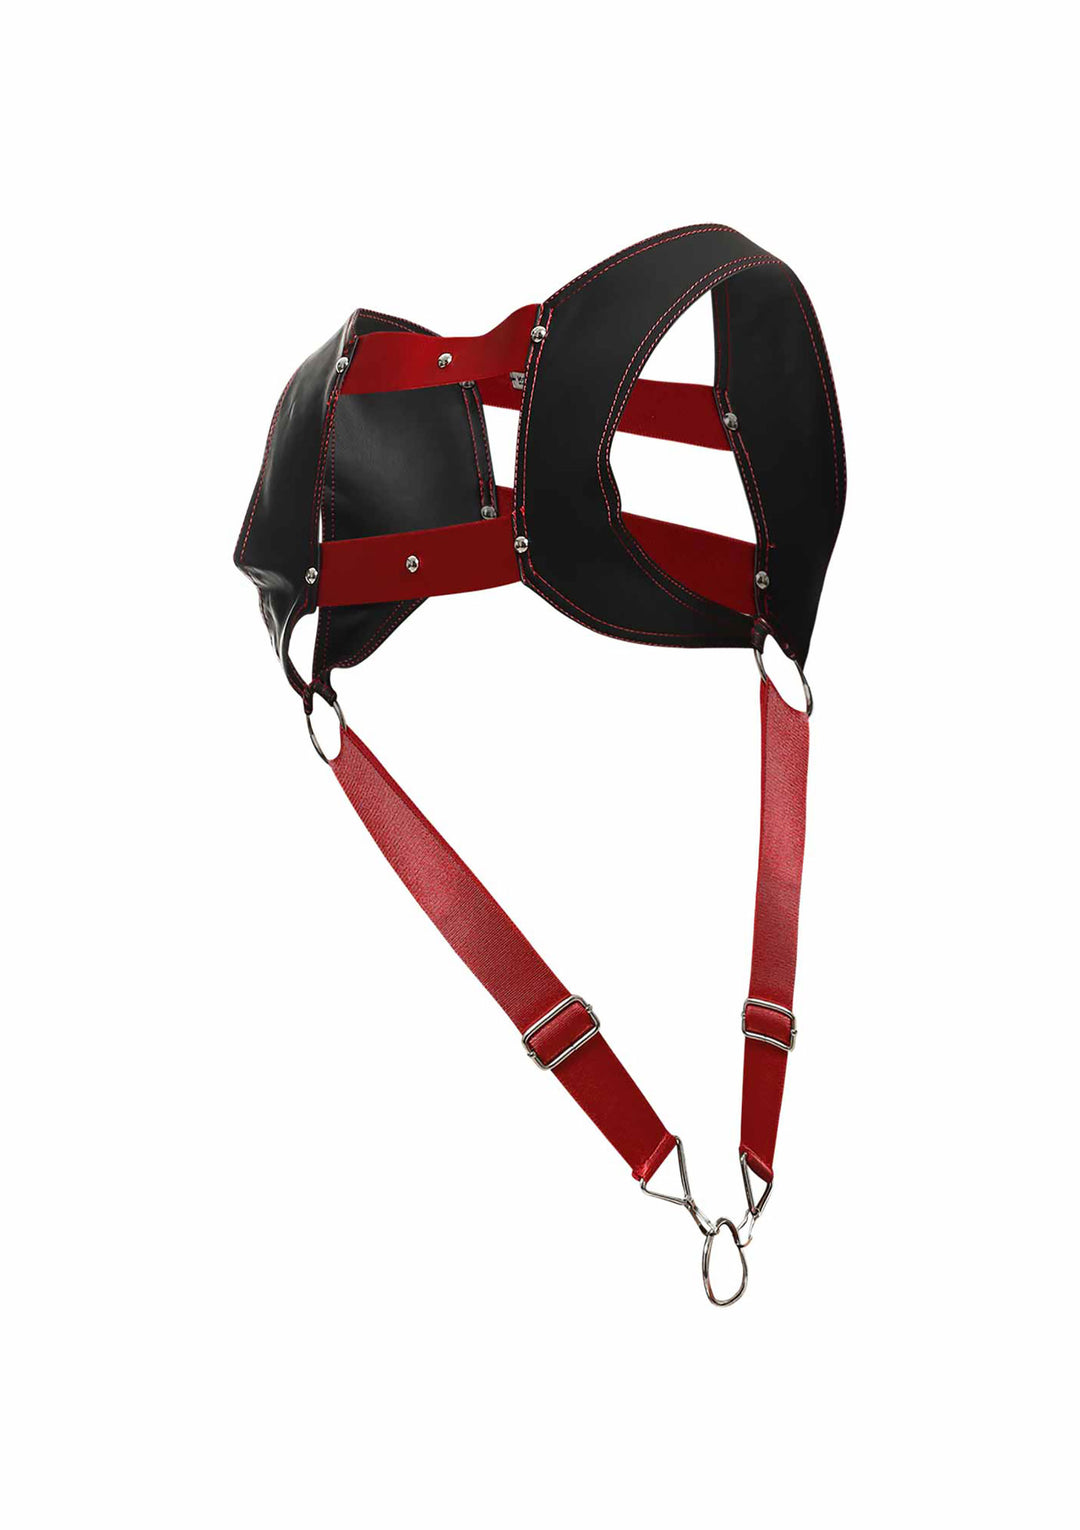 Red and black DNGEON Top Cockring Harness